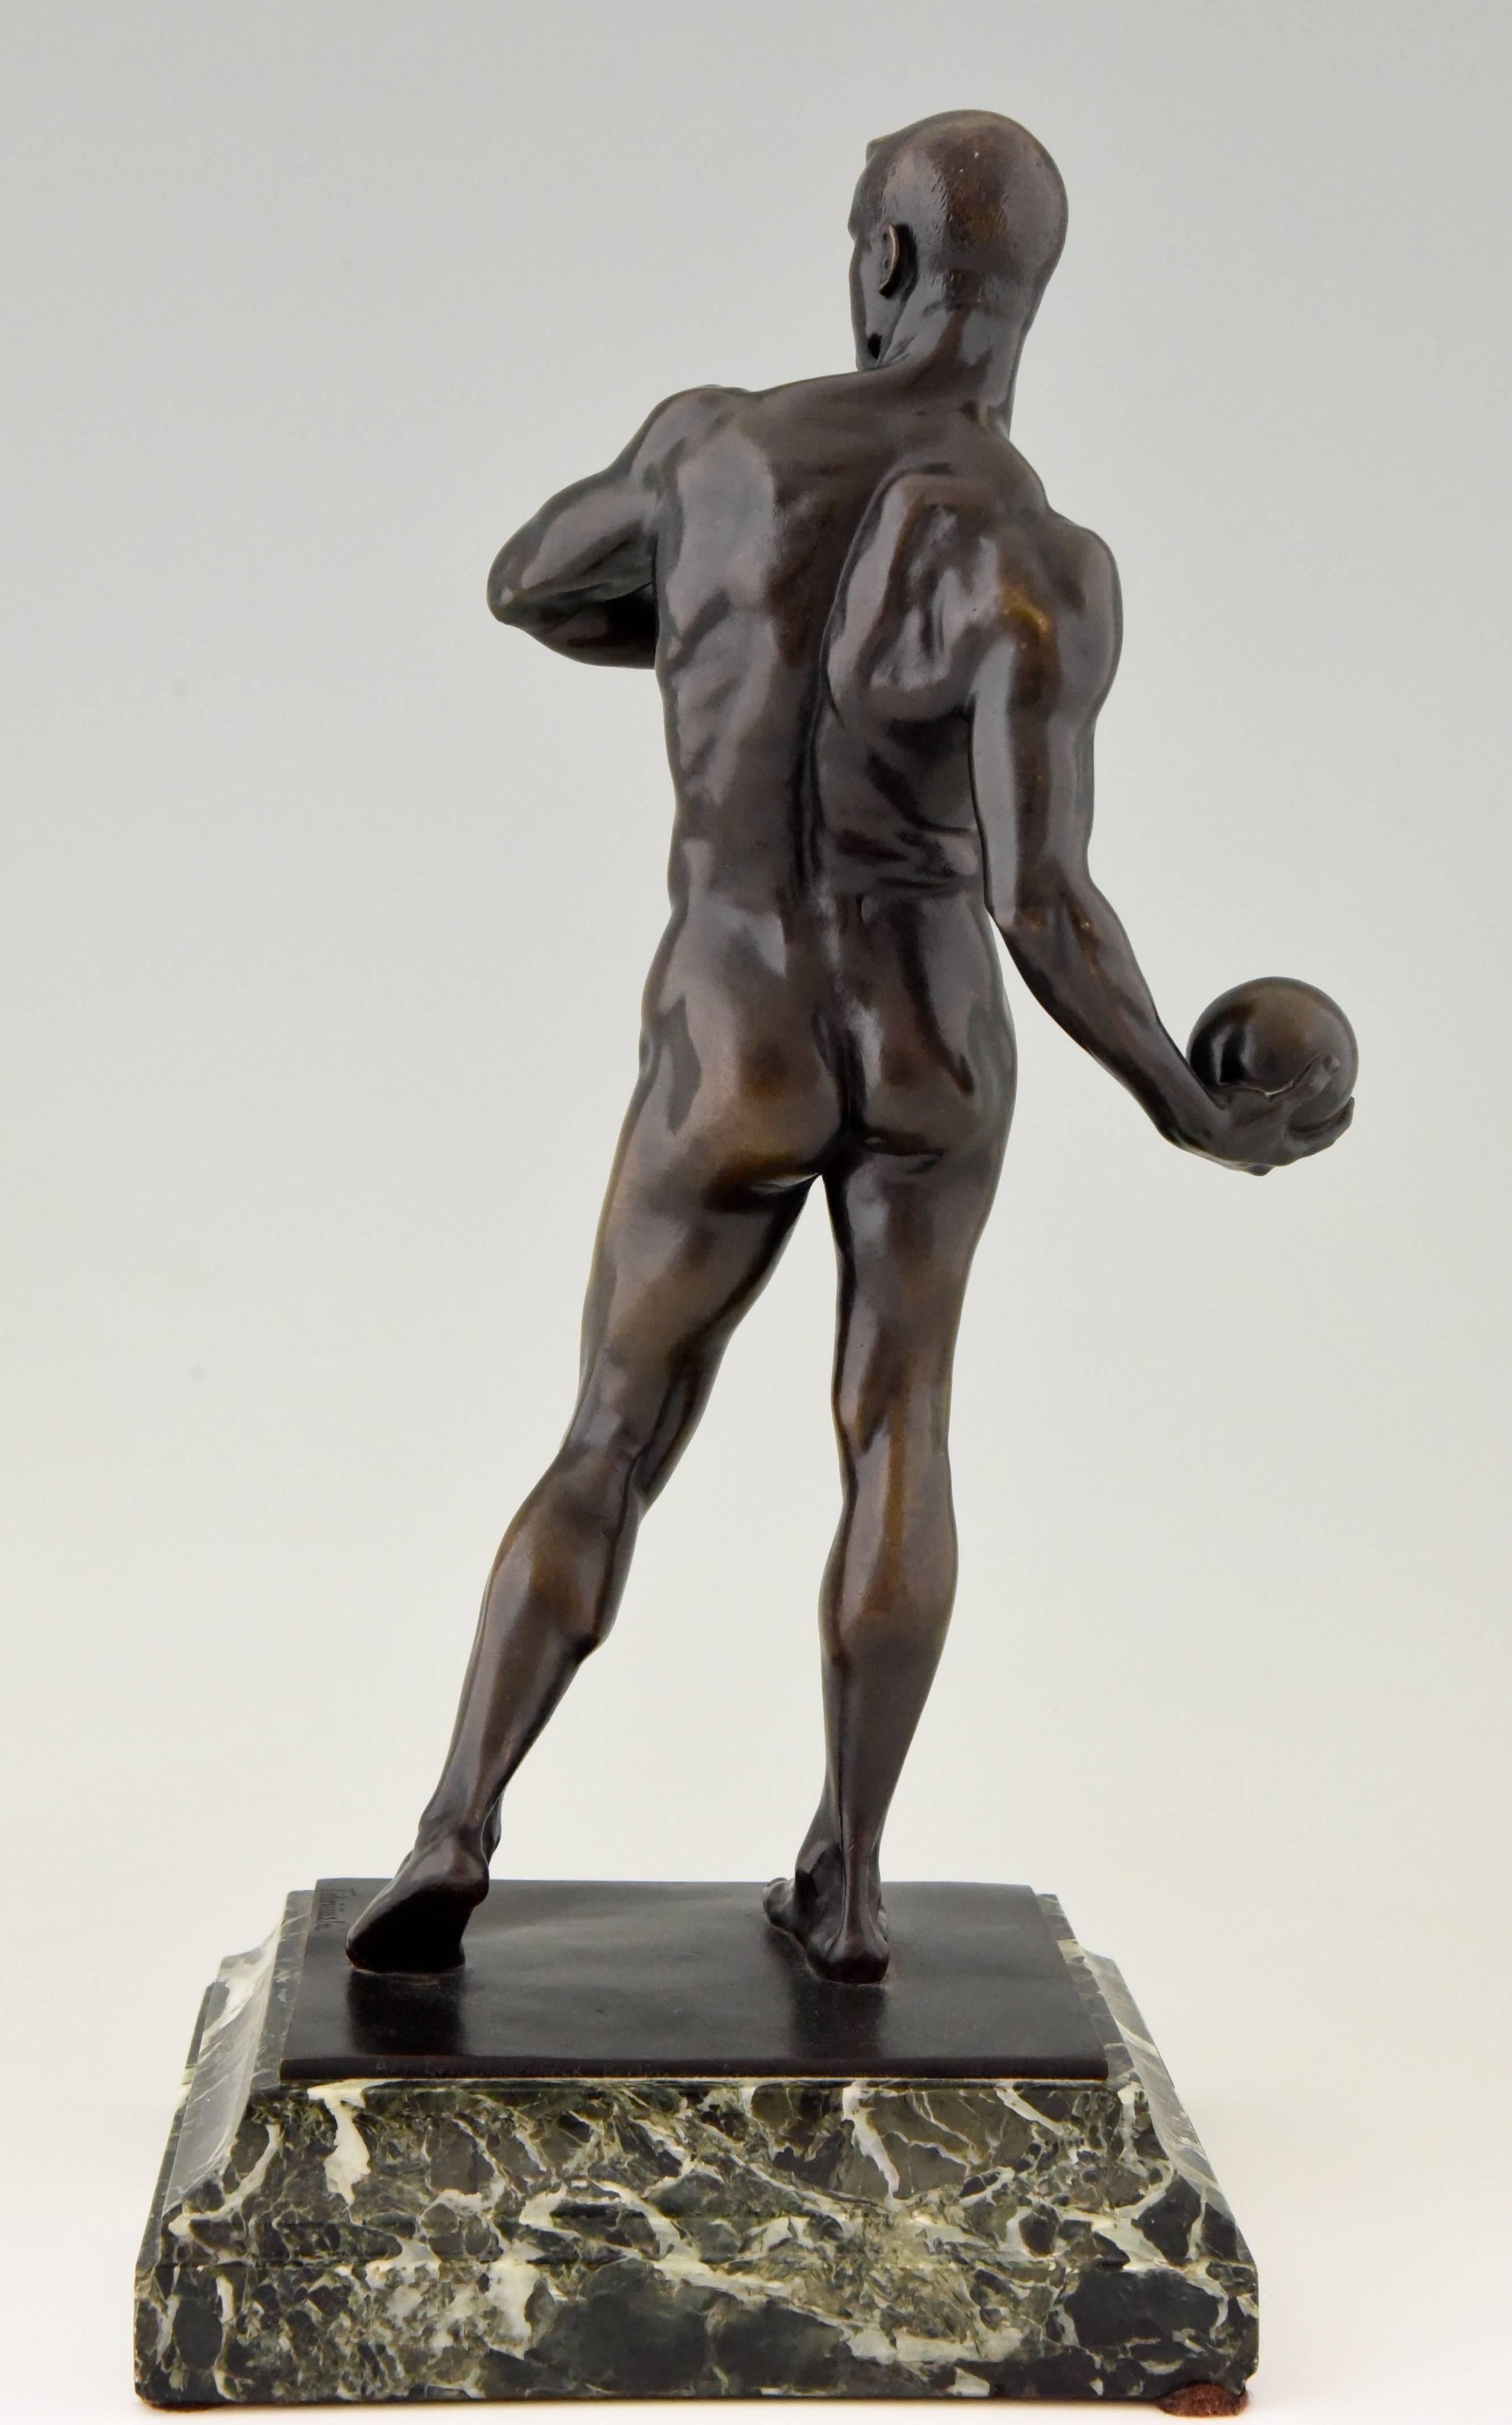 20th Century Antique Bronze Sculpture of a Male Nude, Athlete with Ball by Fabricius, 1904